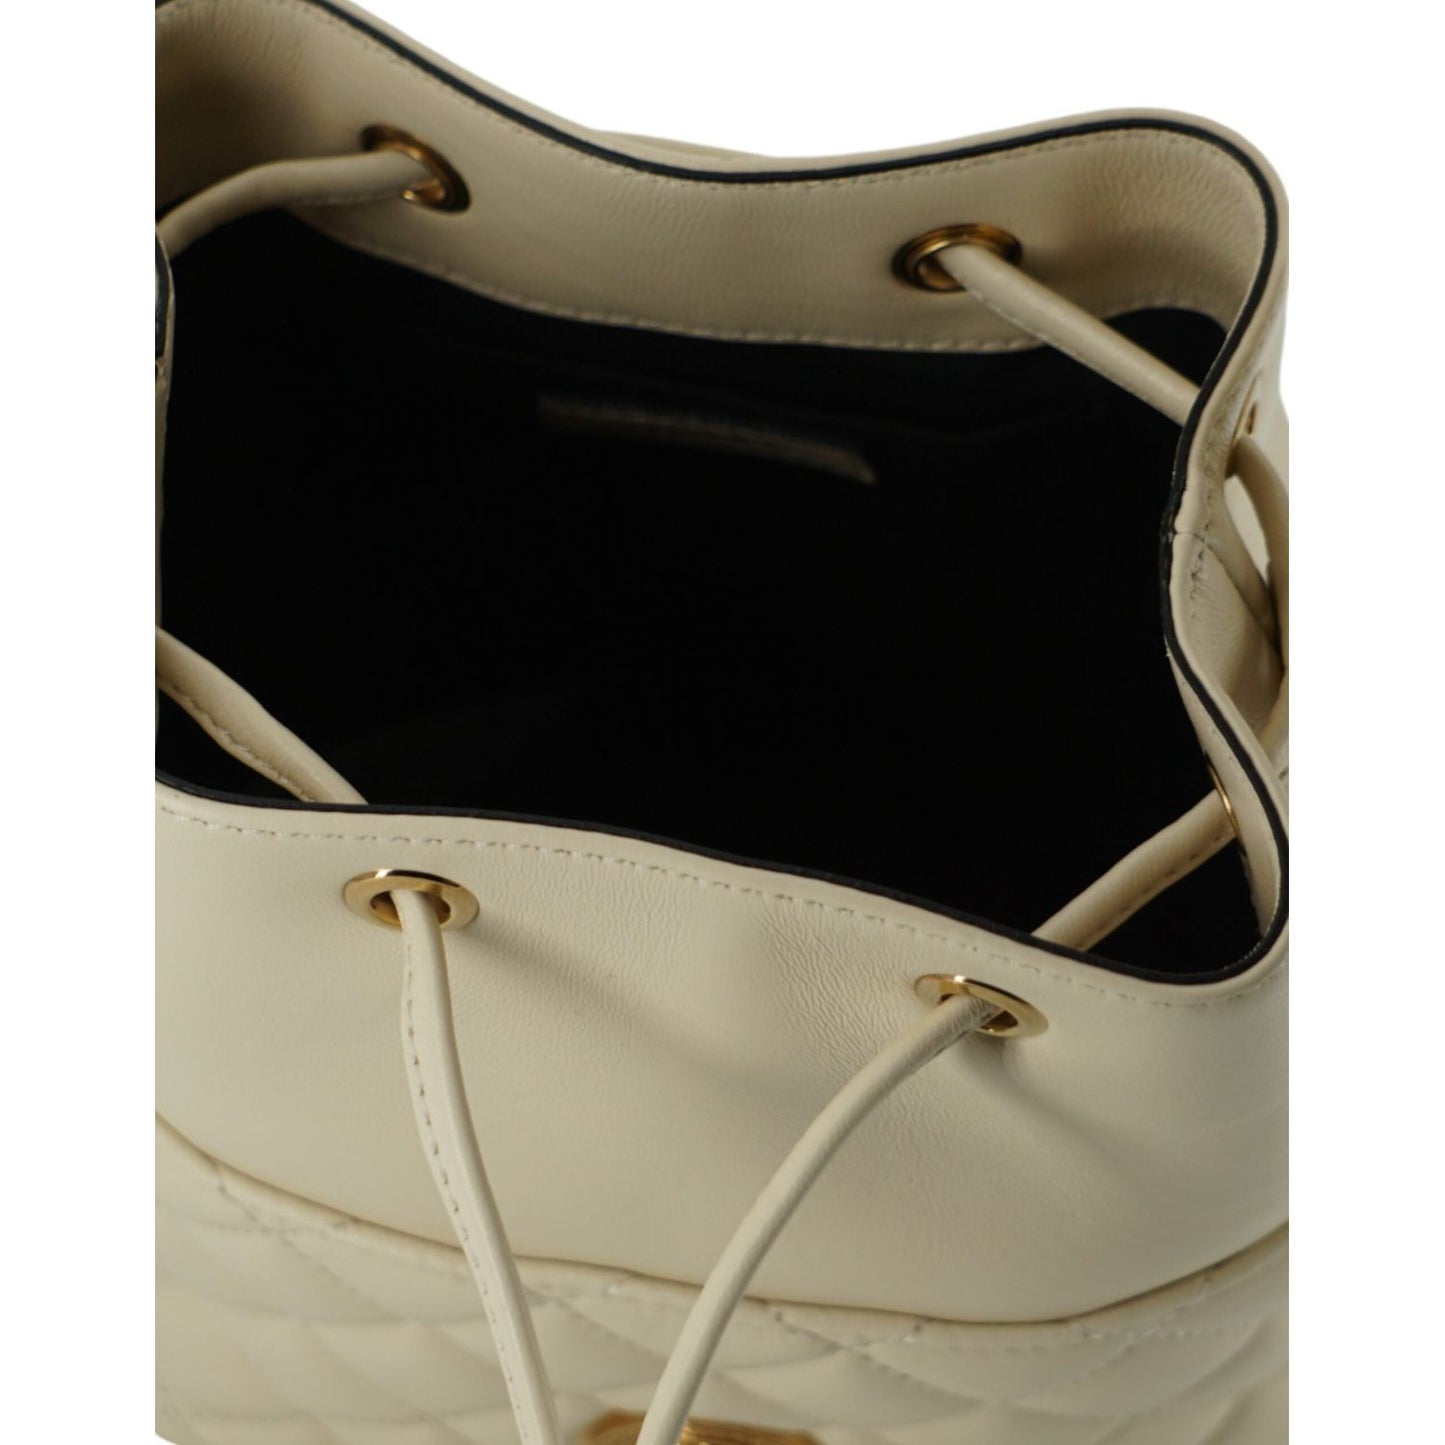 Versace White Lamb Leather Small Bucket Shoulder Bag white-lamb-leather-small-bucket-shoulder-bag DSC01111-scaled-bb62d5ed-365.jpg